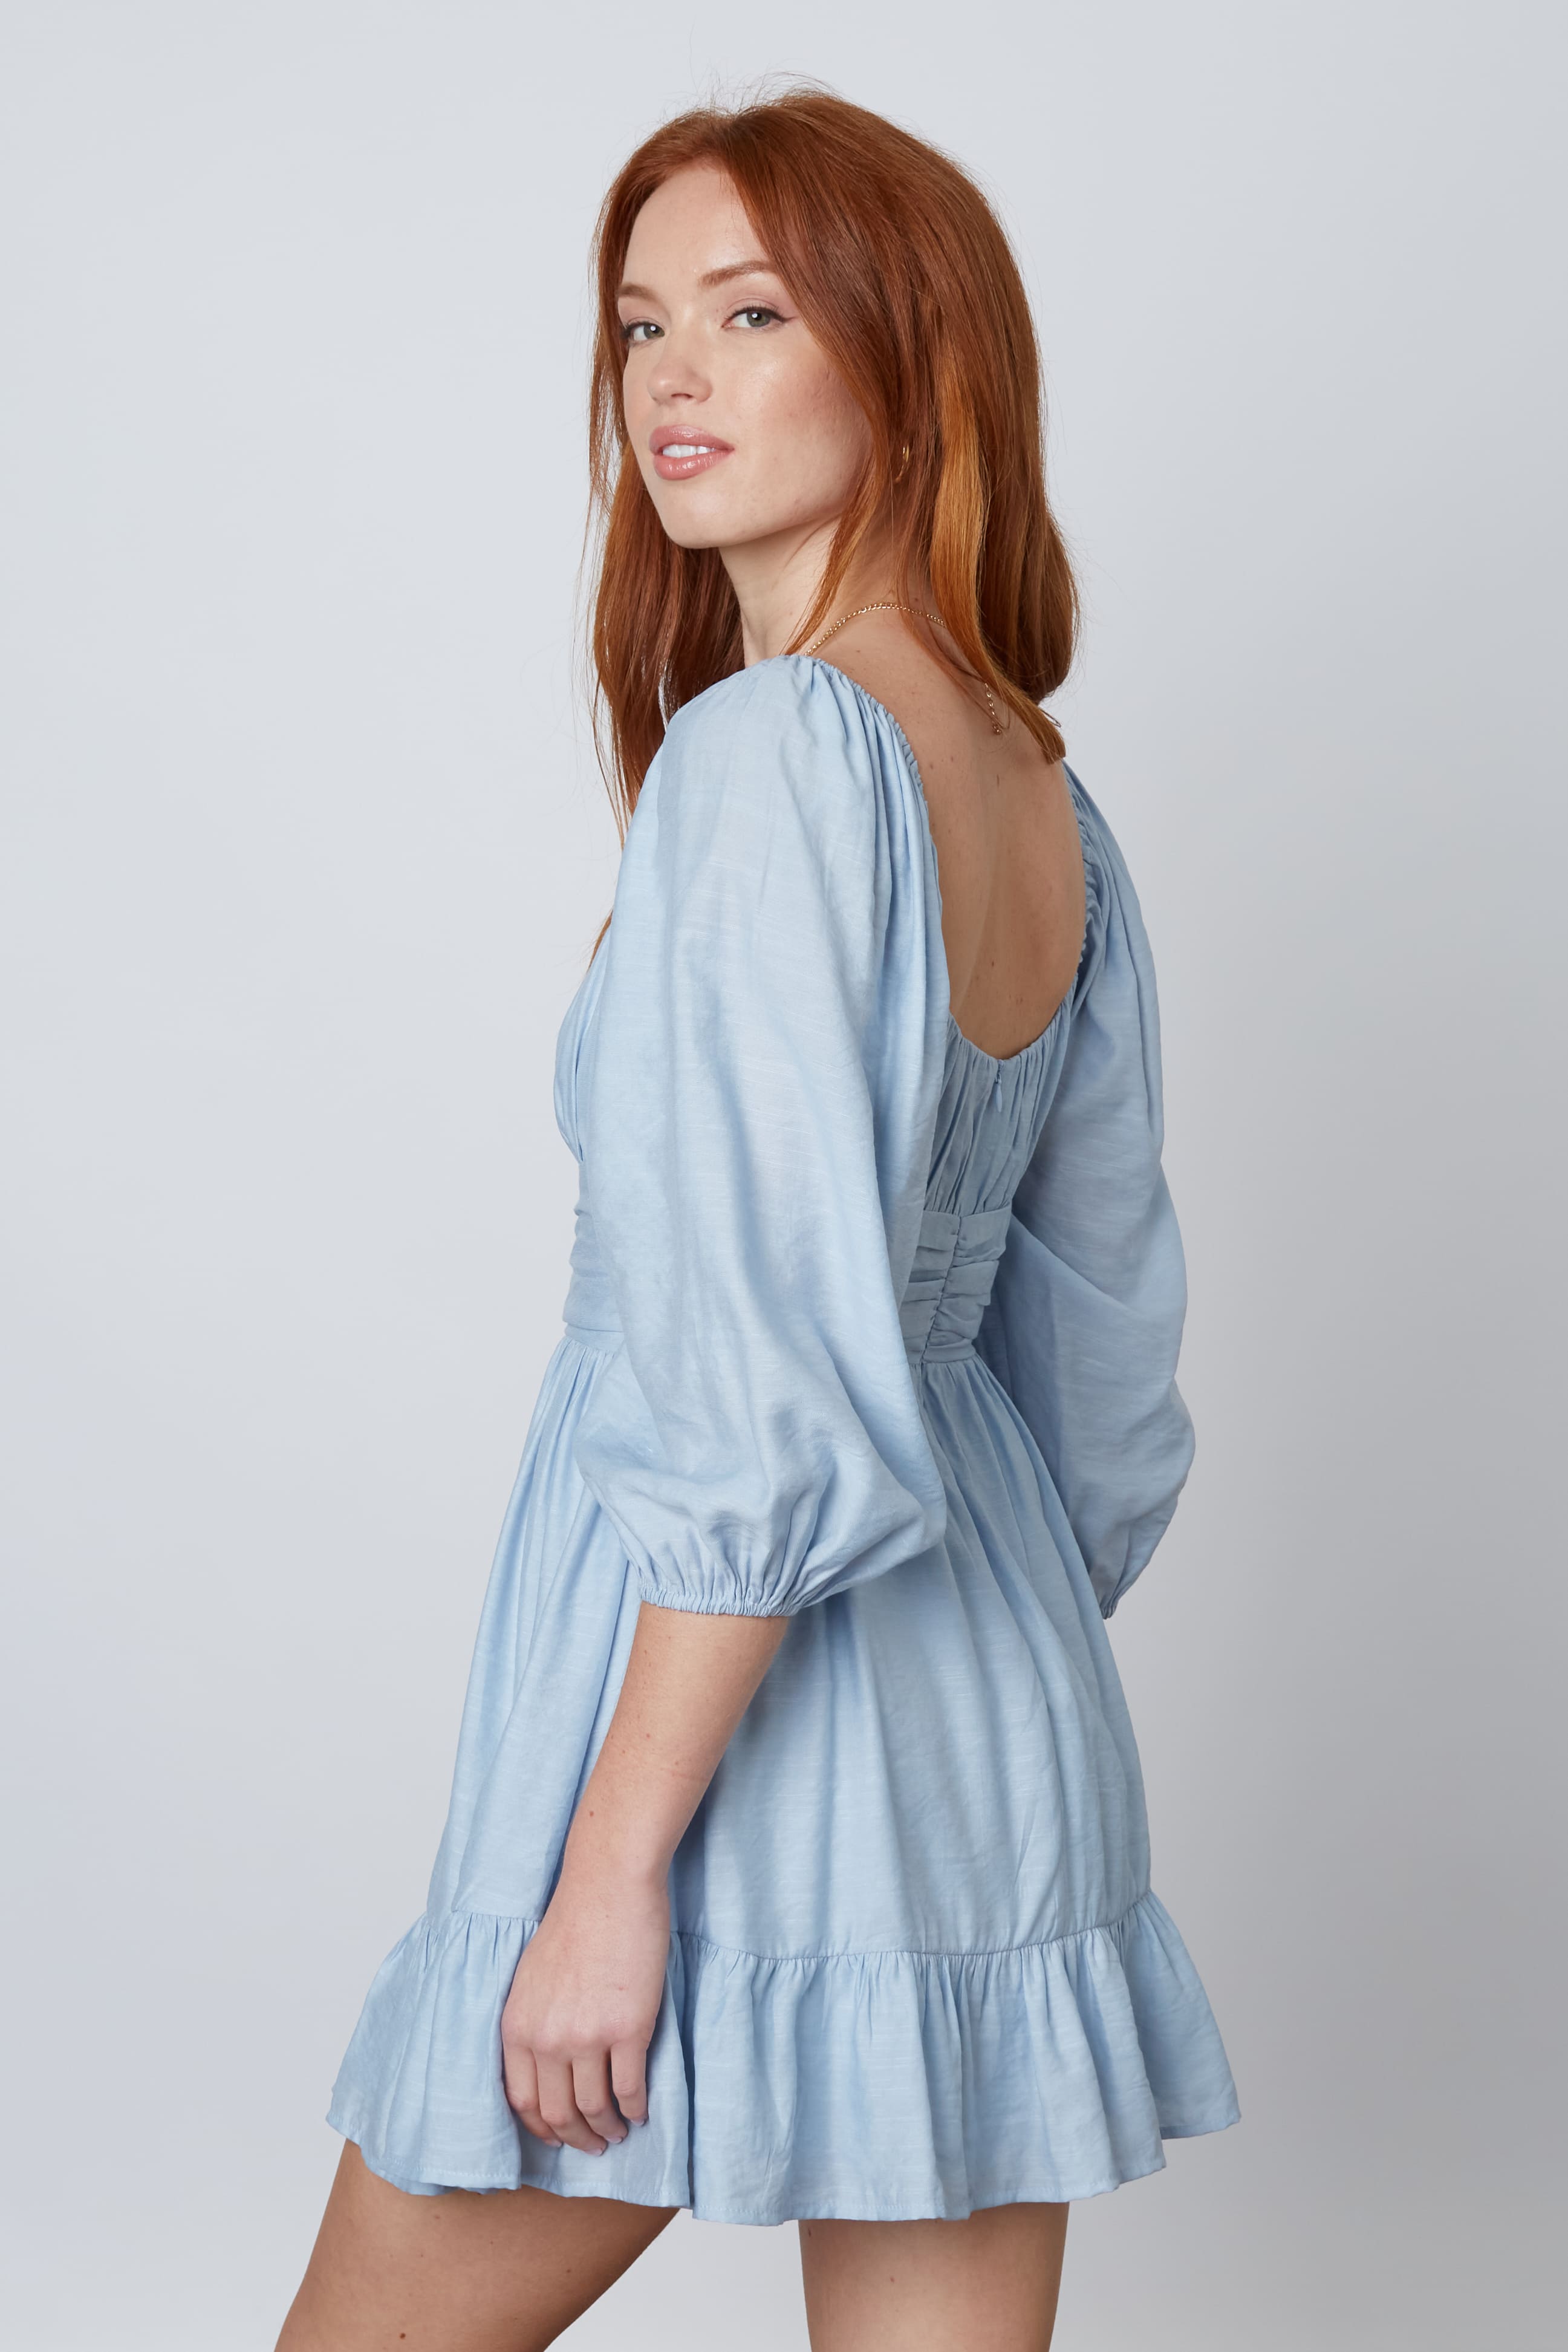 Baby Doll Mini Dress in Chambray Back